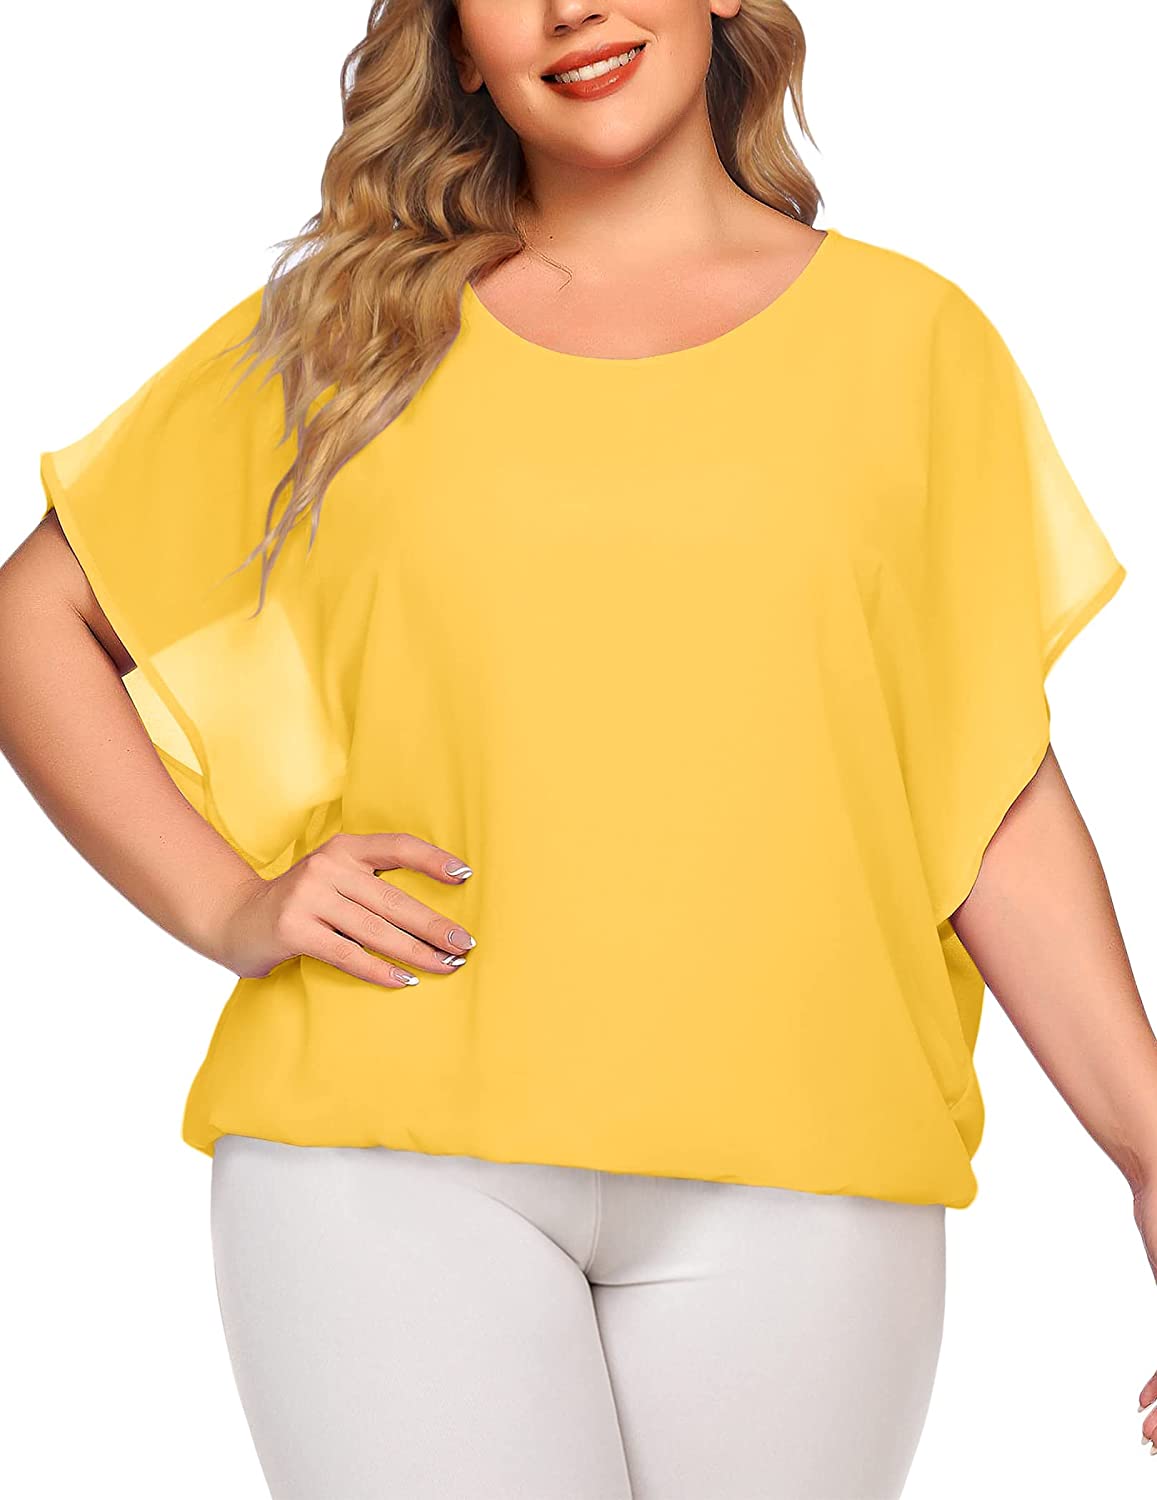 IN'VOLAND Plus Size Women Chiffon Blouse Batwing Sleeve Tops Scoop Neck  Tunic Sh